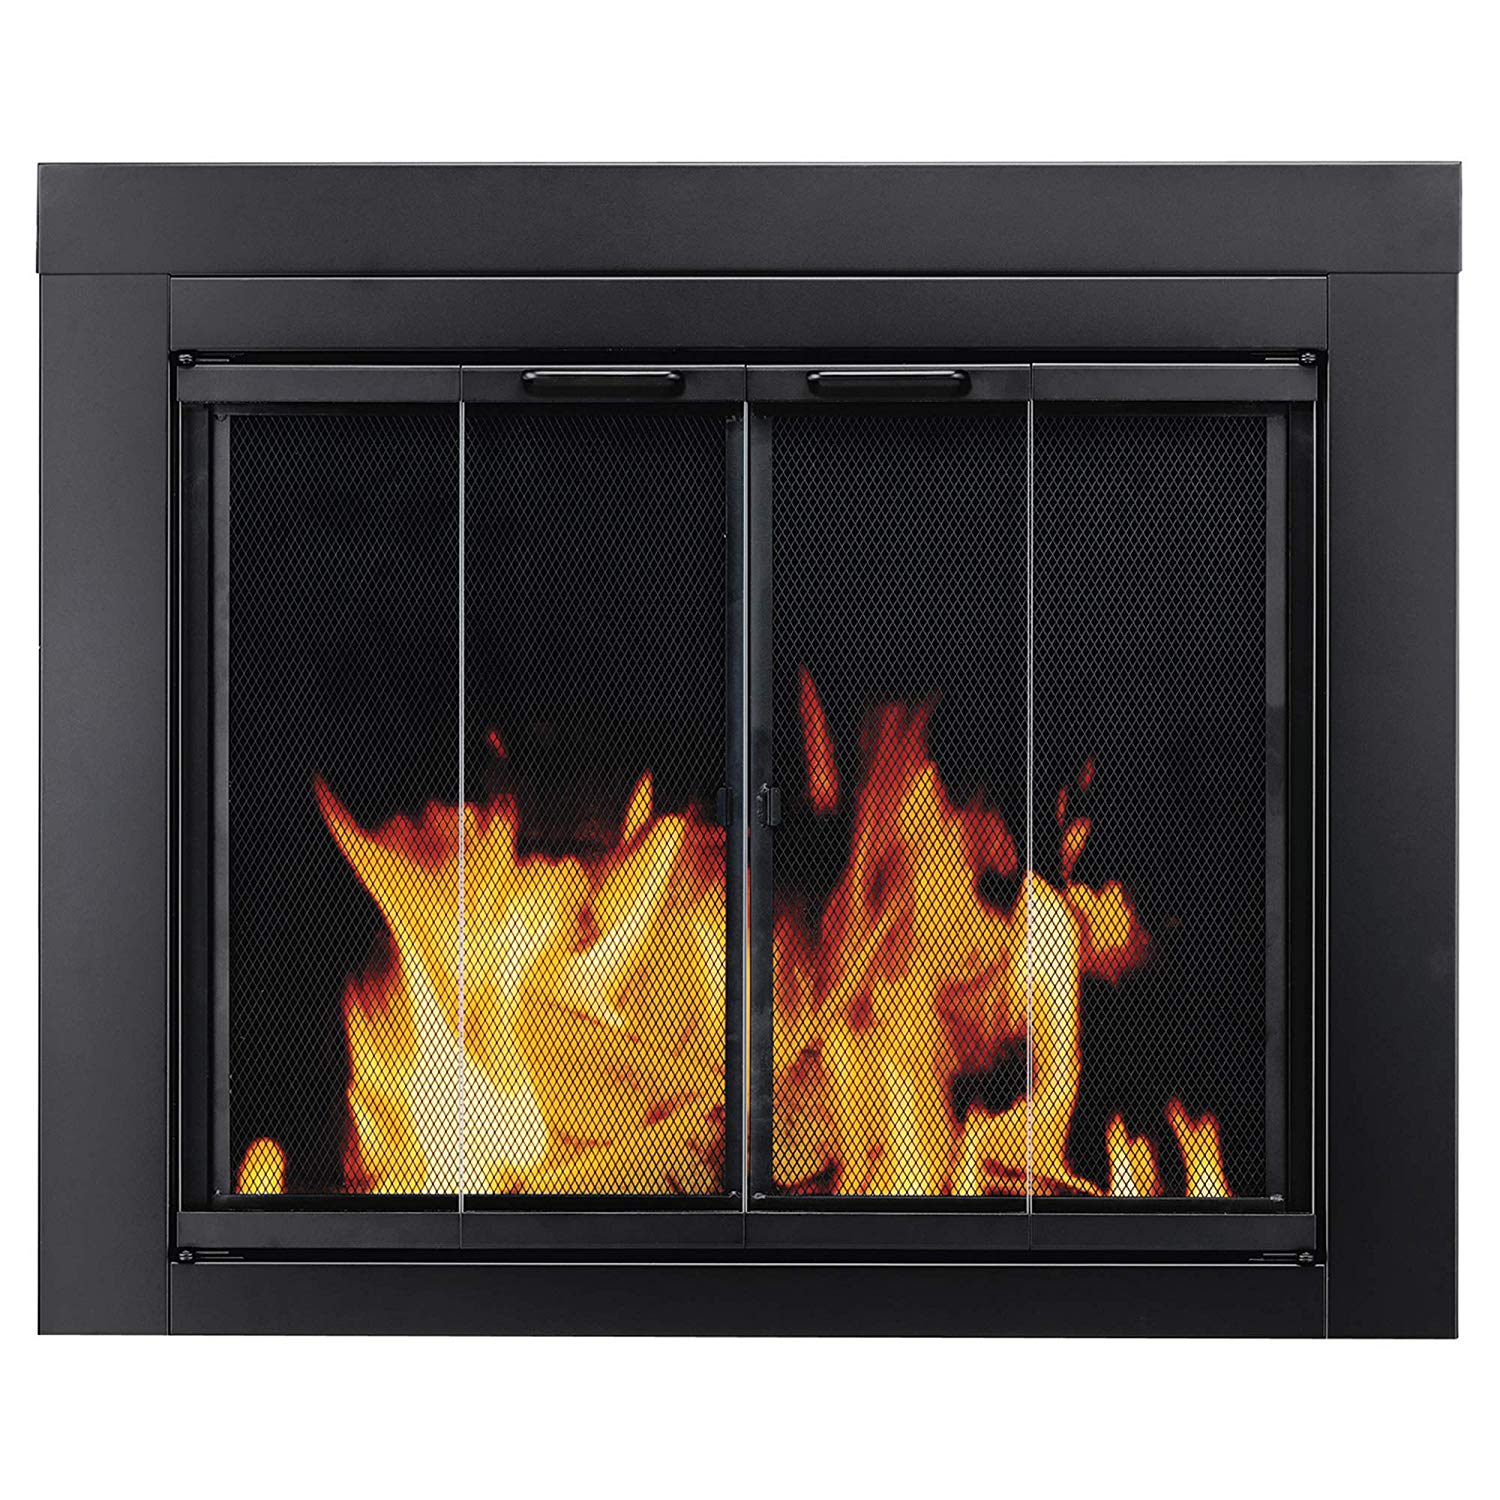 Oil Rubbed Bronze Fireplace Doors Fresh Pleasant Hearth at 1000 ascot Fireplace Glass Door Black Small